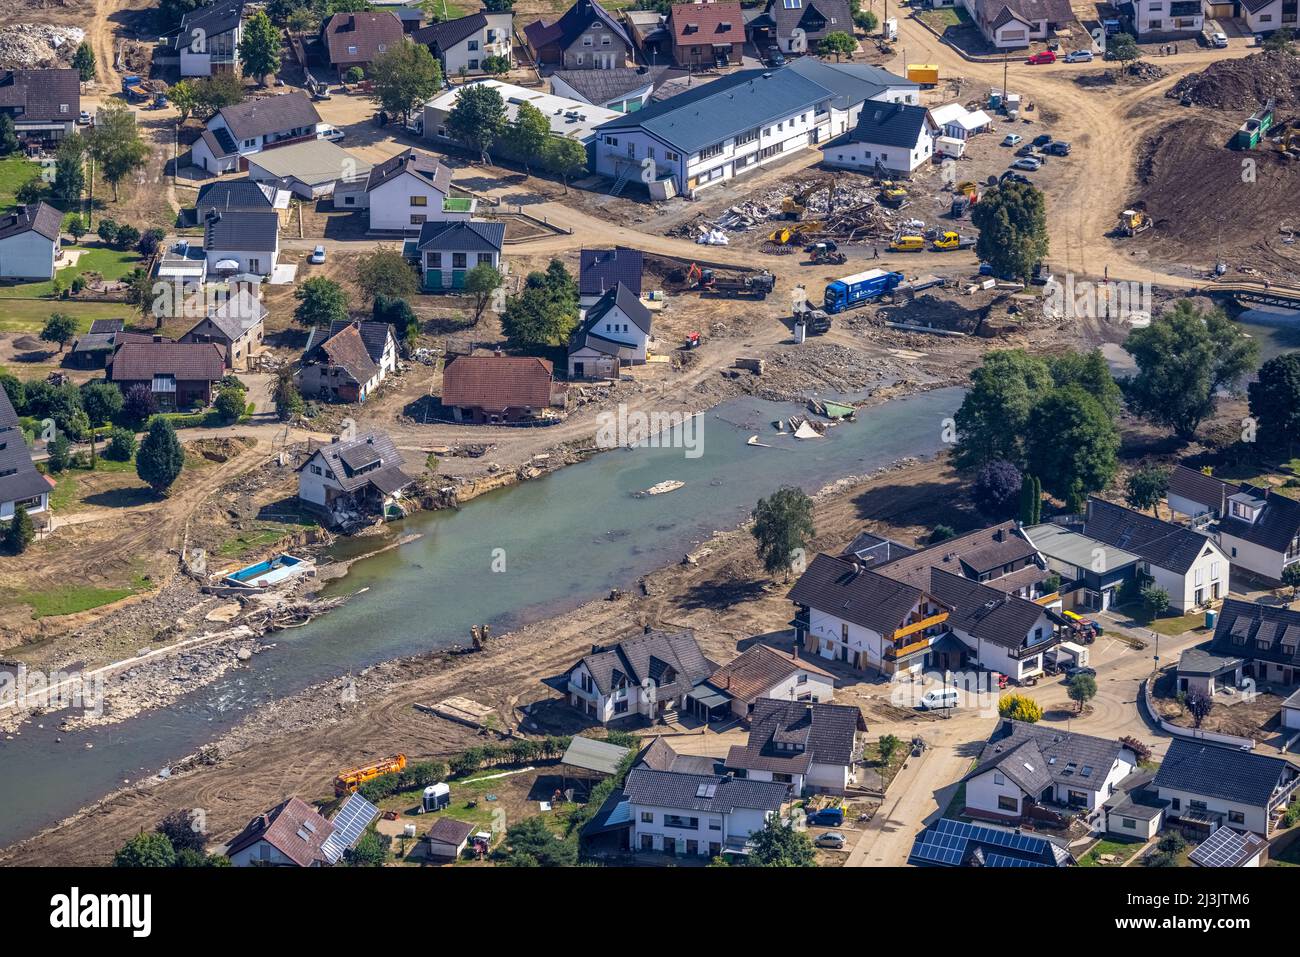 Aerial photograph, flooded area on the river Ahr in Insul, Ahr flood, Ahr valley, Rhineland-Palatinate, Germany, Ahr flood, mountains and valleys, bri Stock Photo